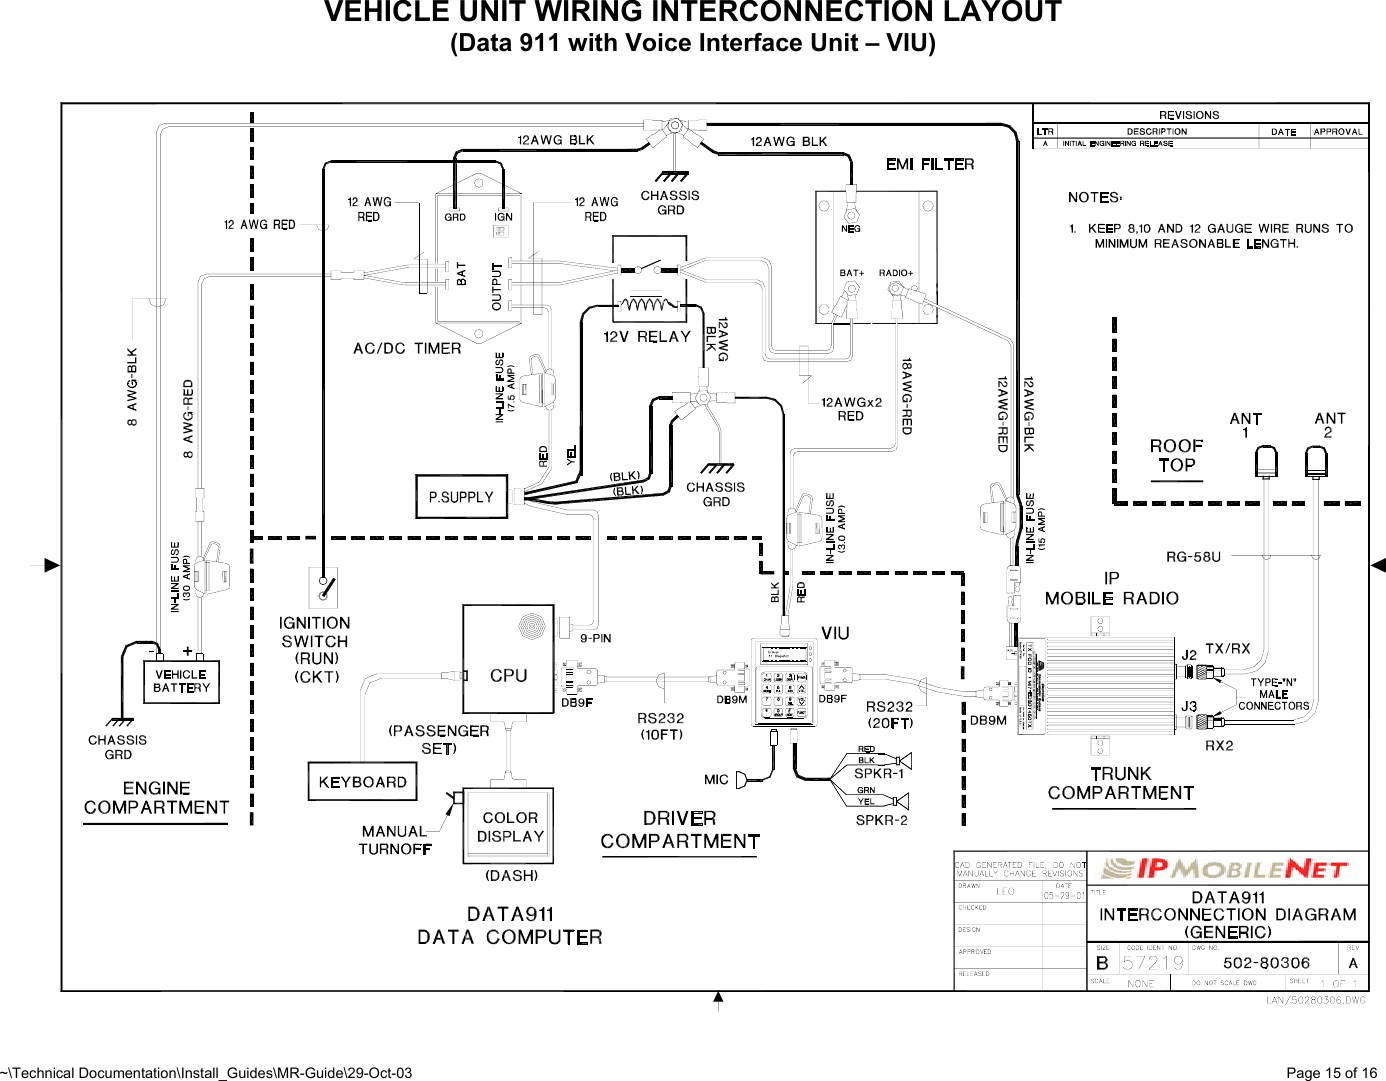 ~\Technical Documentation\Install_Guides\MR-Guide\29-Oct-03   Page 15 of 16 VEHICLE UNIT WIRING INTERCONNECTION LAYOUT (Data 911 with Voice Interface Unit – VIU)        